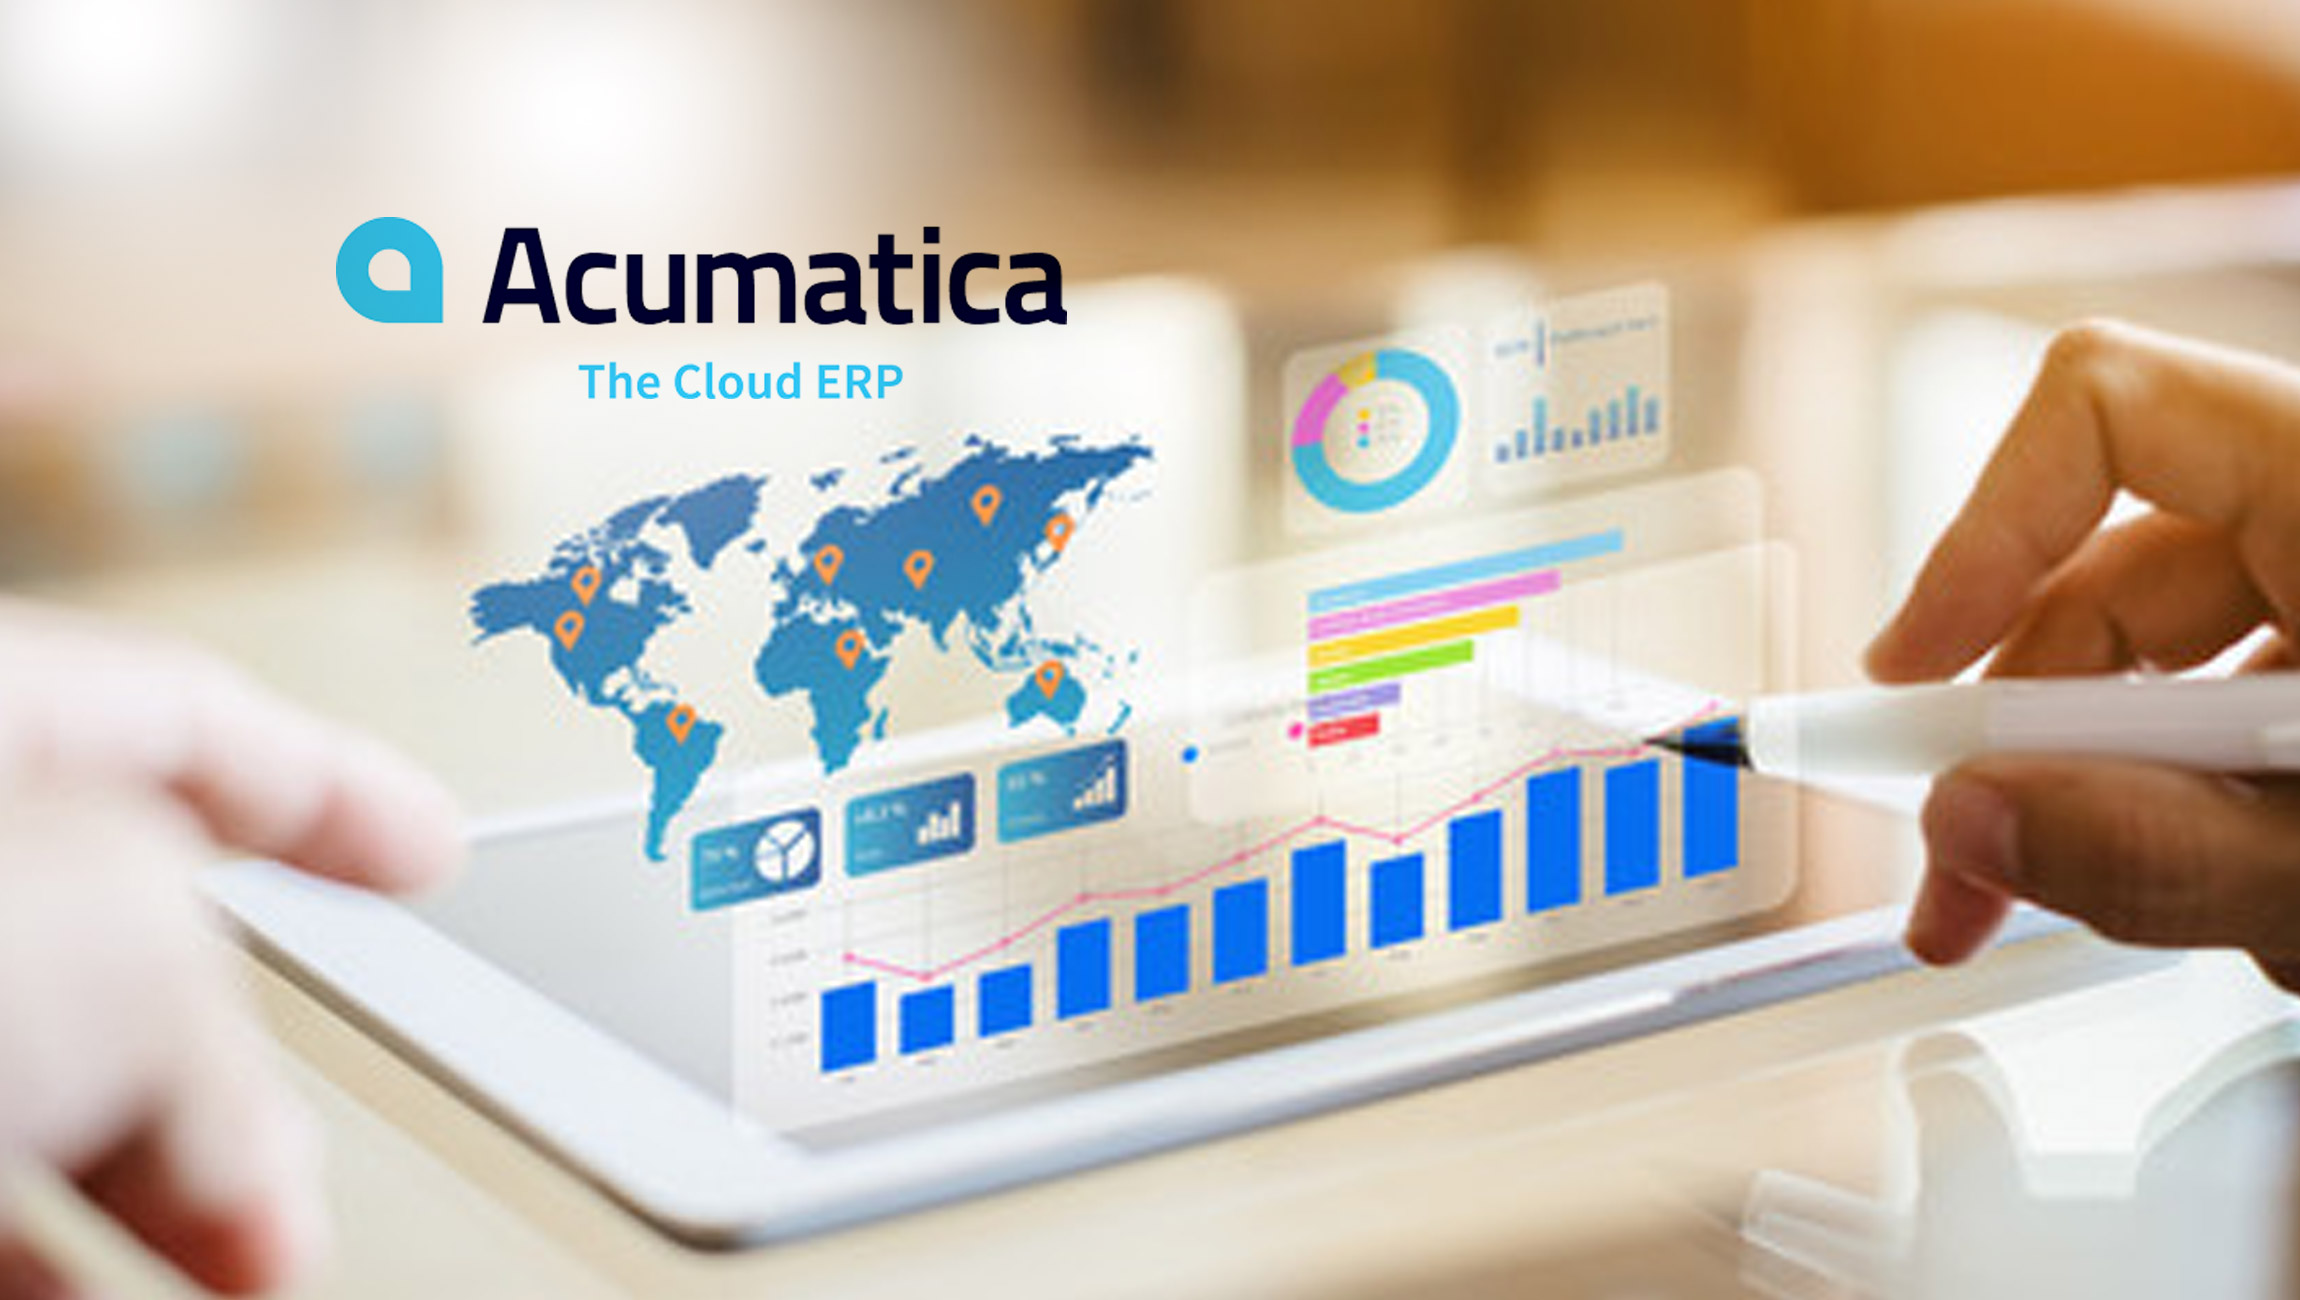 Acumatica Cloud ERP Facilitates Media and Technology Firm's Rapid Growth During the Pandemic